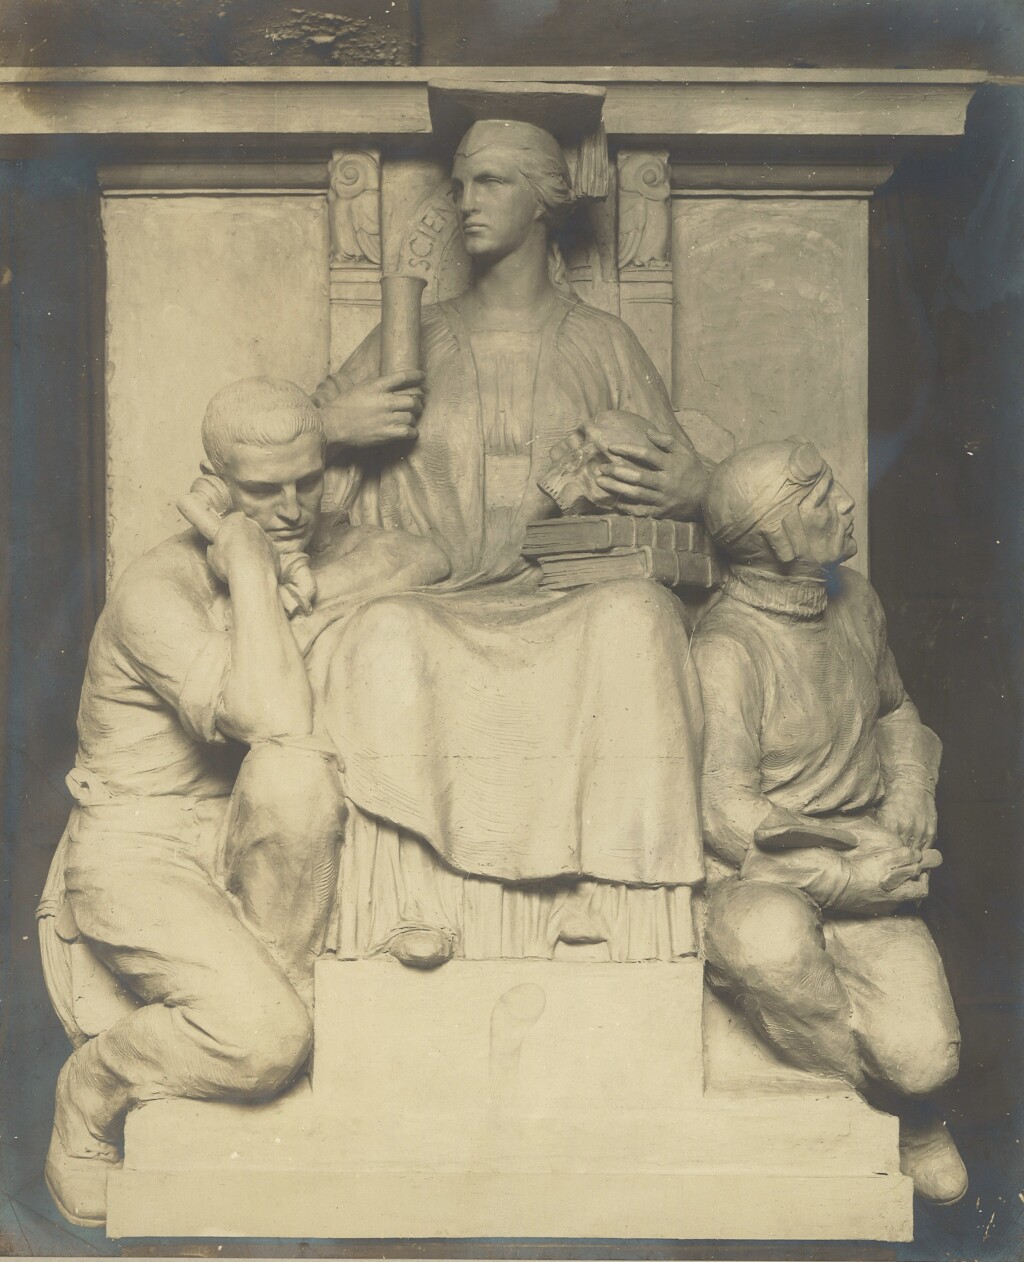 Sepia photograph of a plaster model for a sculpture of three figures: a seated woman wearing a square academic cap (mortar board) raised above two seated men either side of her, one holding a telephone receiver and the other dressed as a pilot